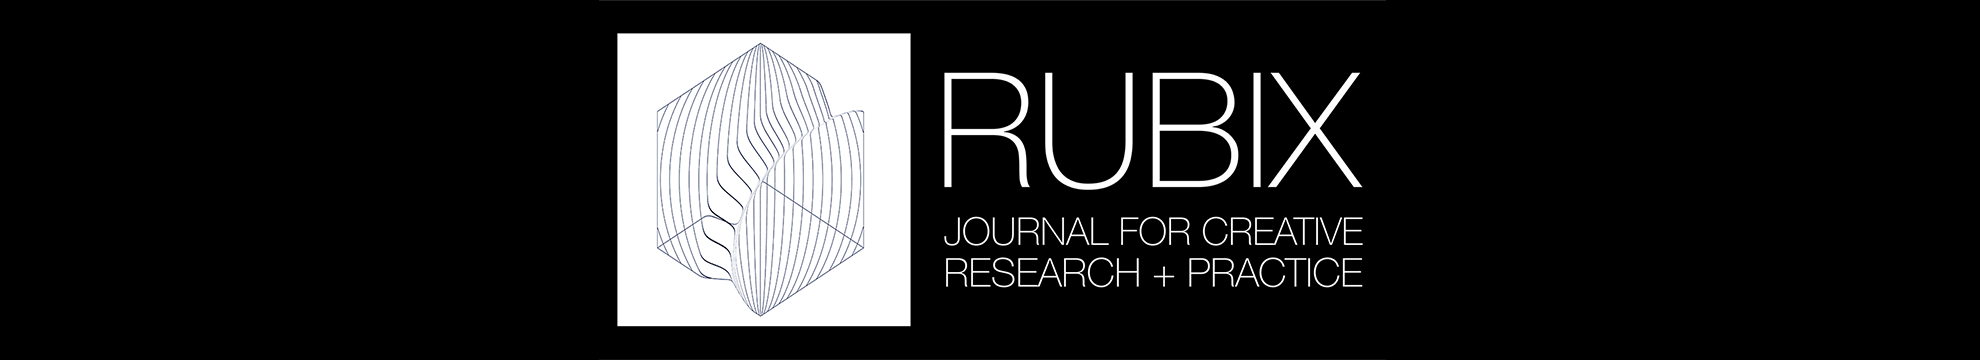 RUBIX: Journal For Creative Research + Practice